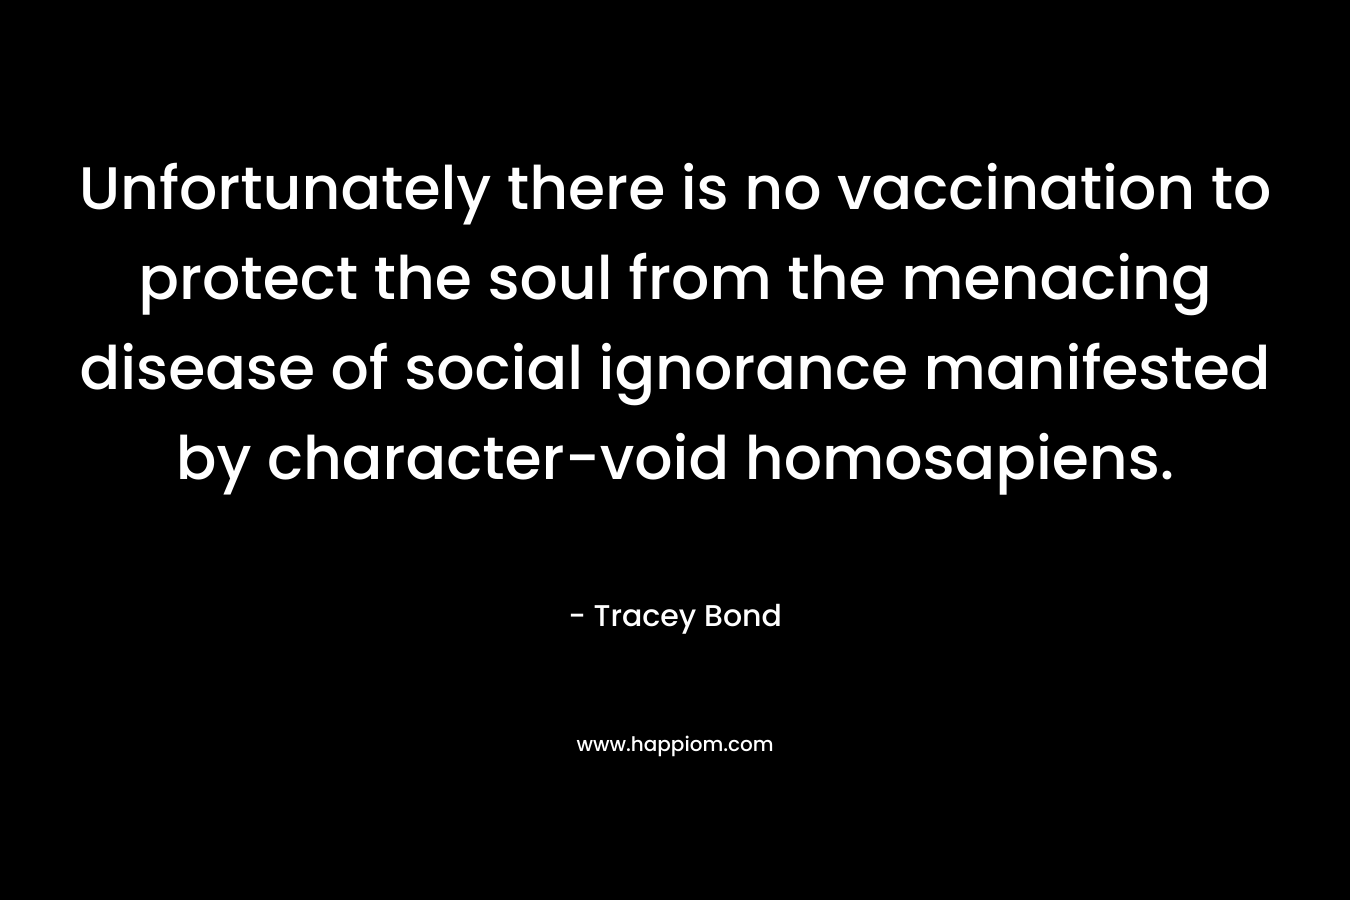 Unfortunately there is no vaccination to protect the soul from the menacing disease of social ignorance manifested by character-void homosapiens. – Tracey Bond